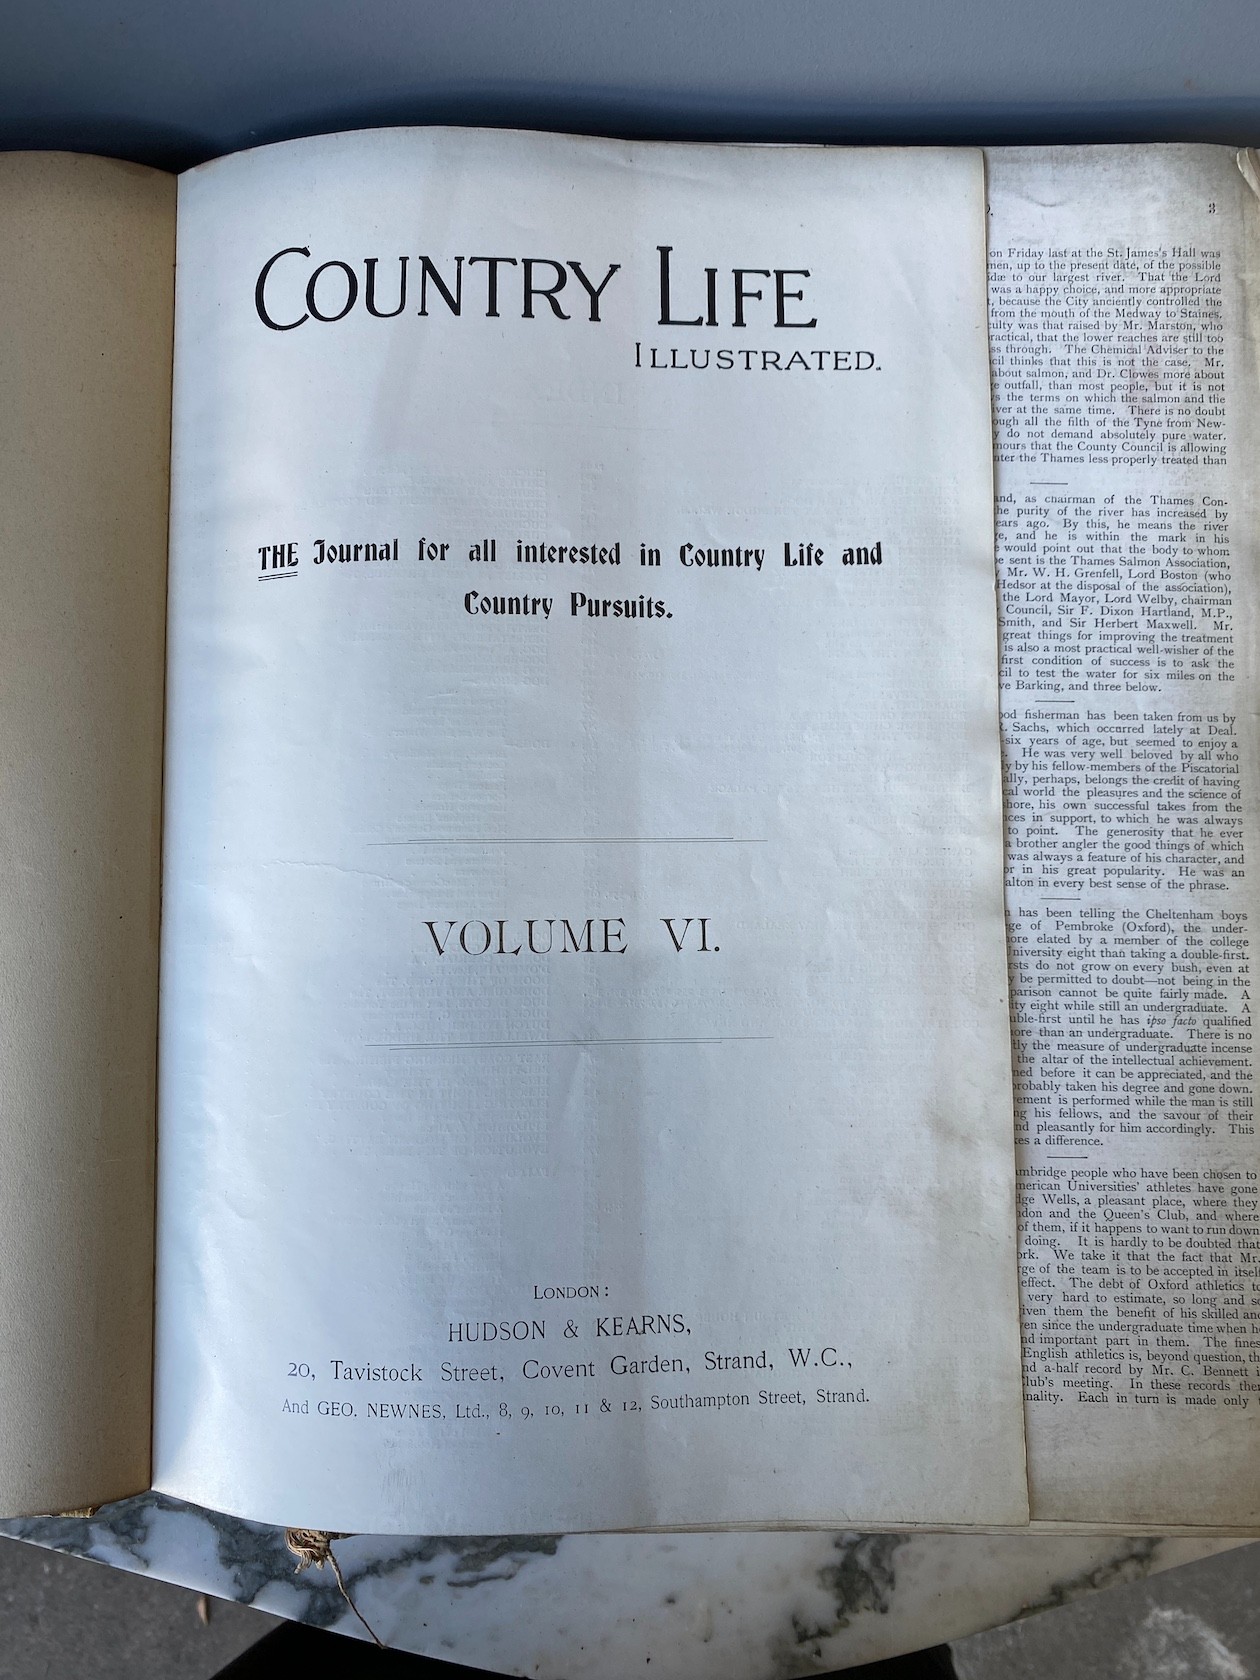 Country Life, vol.1-166 but lacking vol.34, 1897-1979 and various other later issues.